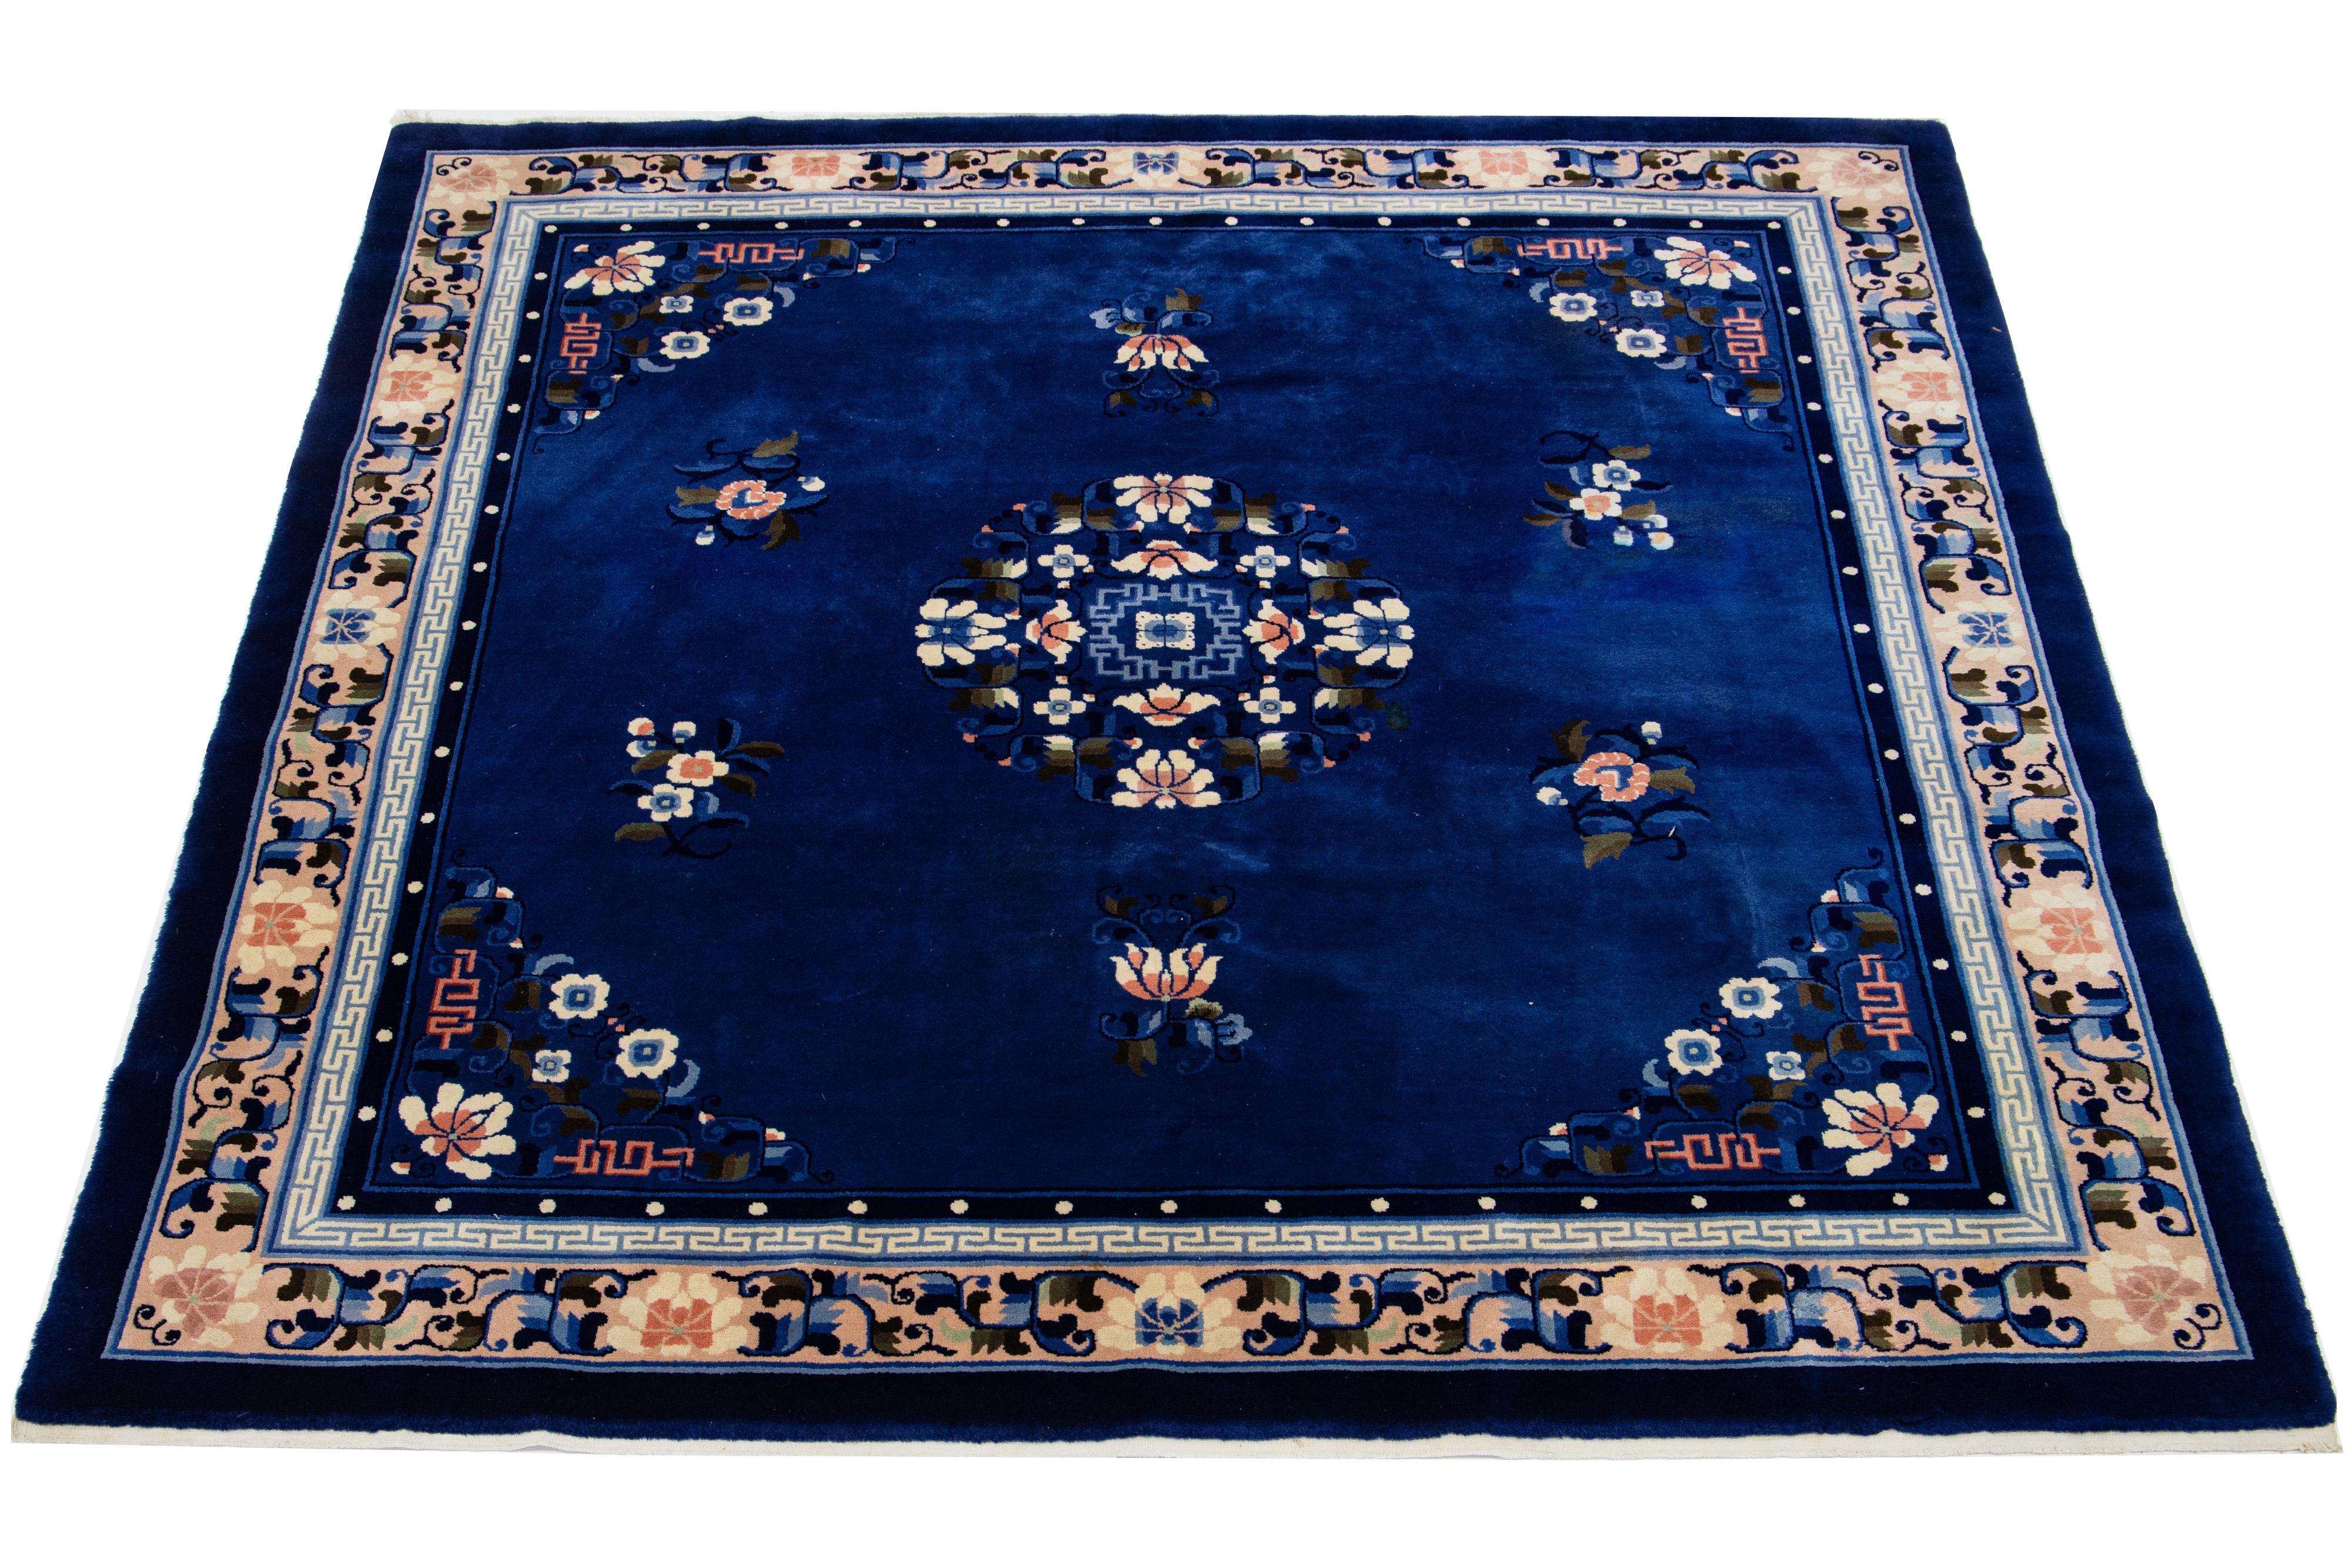 This beautiful hand-knotted wool rug showcases a navy blue center framed by a multicolored border in a stunning Chinese floral pattern.

This rug measures 7' x 7'2